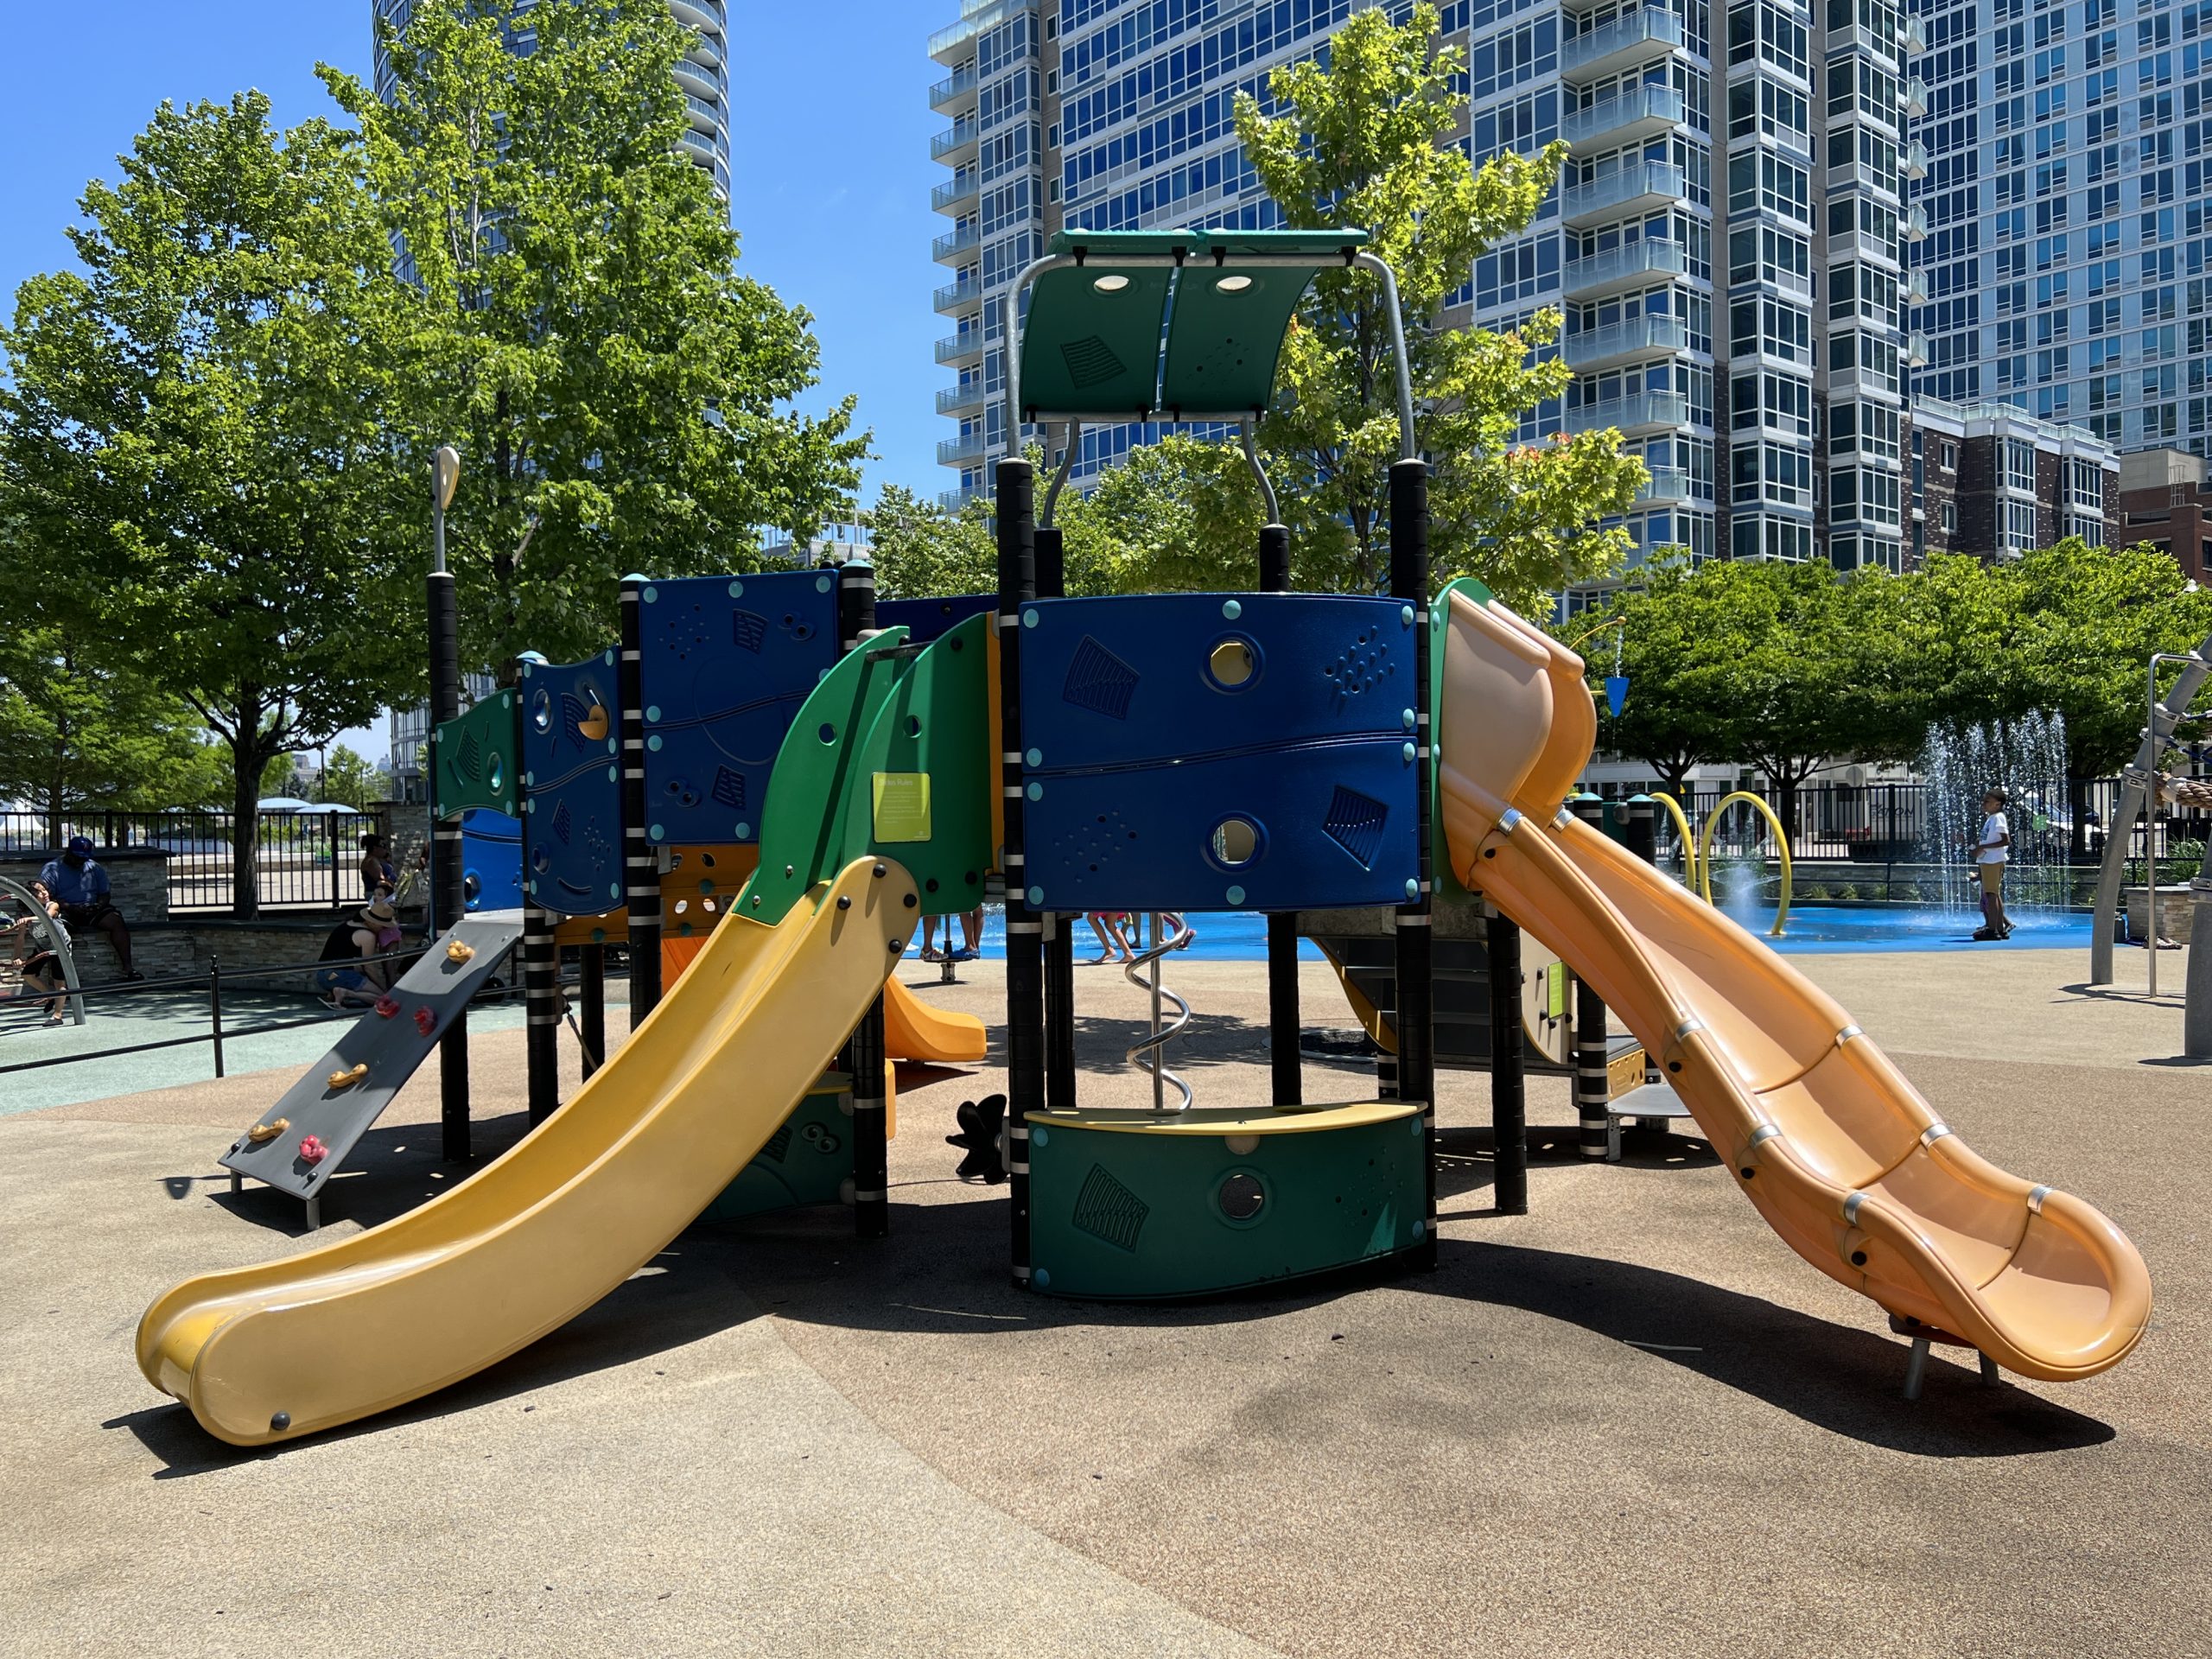 WIDE - multicolor playground side 2 with view of 2 slides. AT Newport Green Park Playground in Jersey City NJ